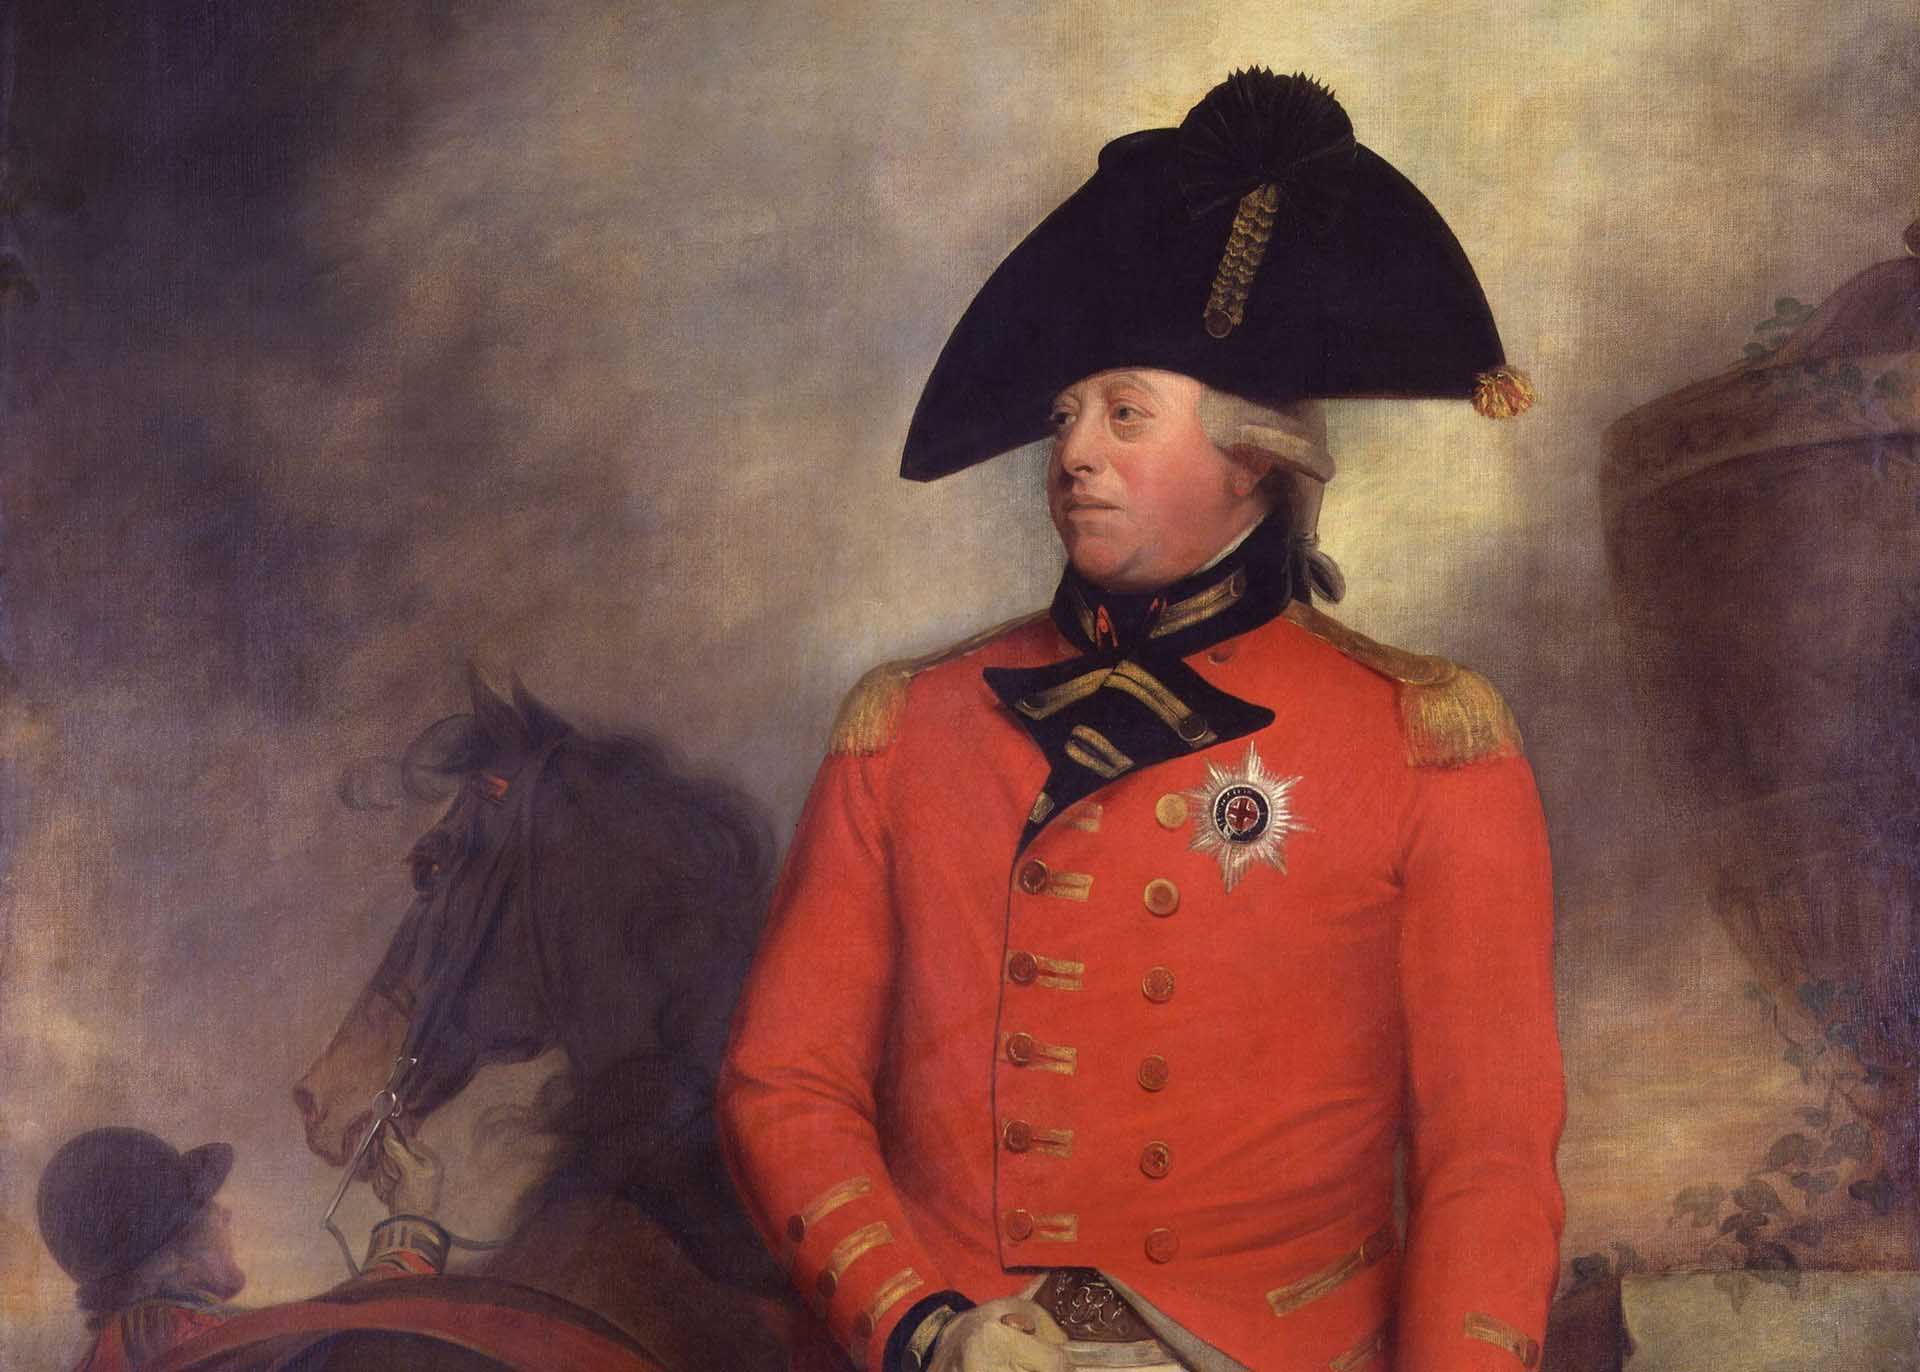 Portrait of George III from around 1800 by William Beechey. The first modern Double Sovereigns were struck at the end of George's reign, reportedly on 29 January 1820: the very night of his death.